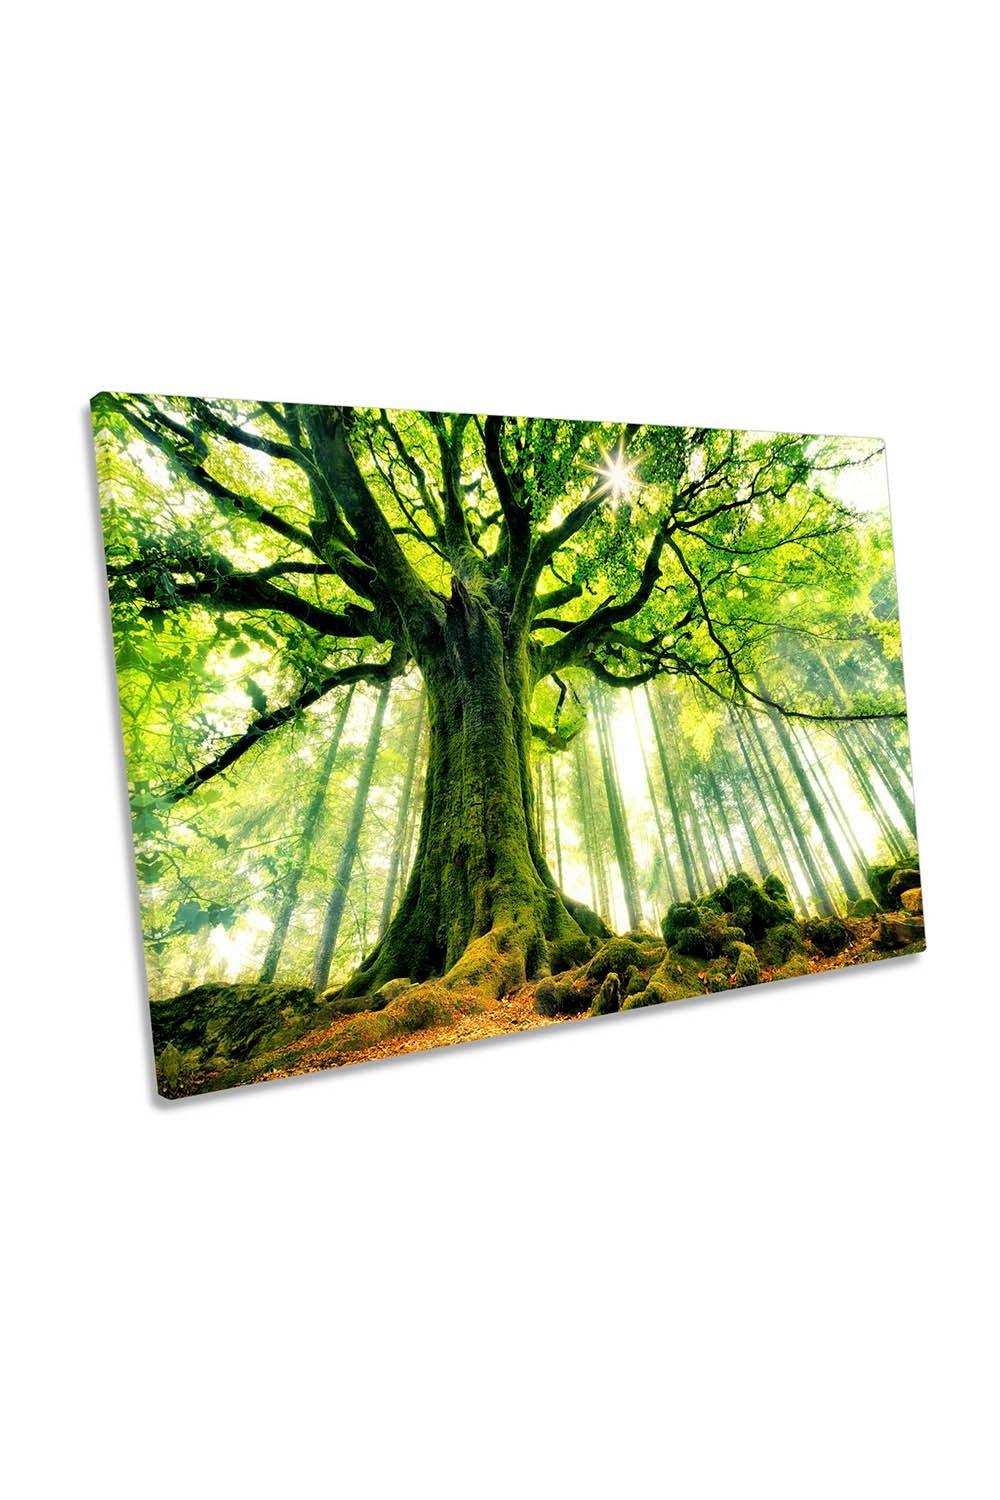 Ponthus Beech Tree Forest Green Canvas Wall Art Picture Print